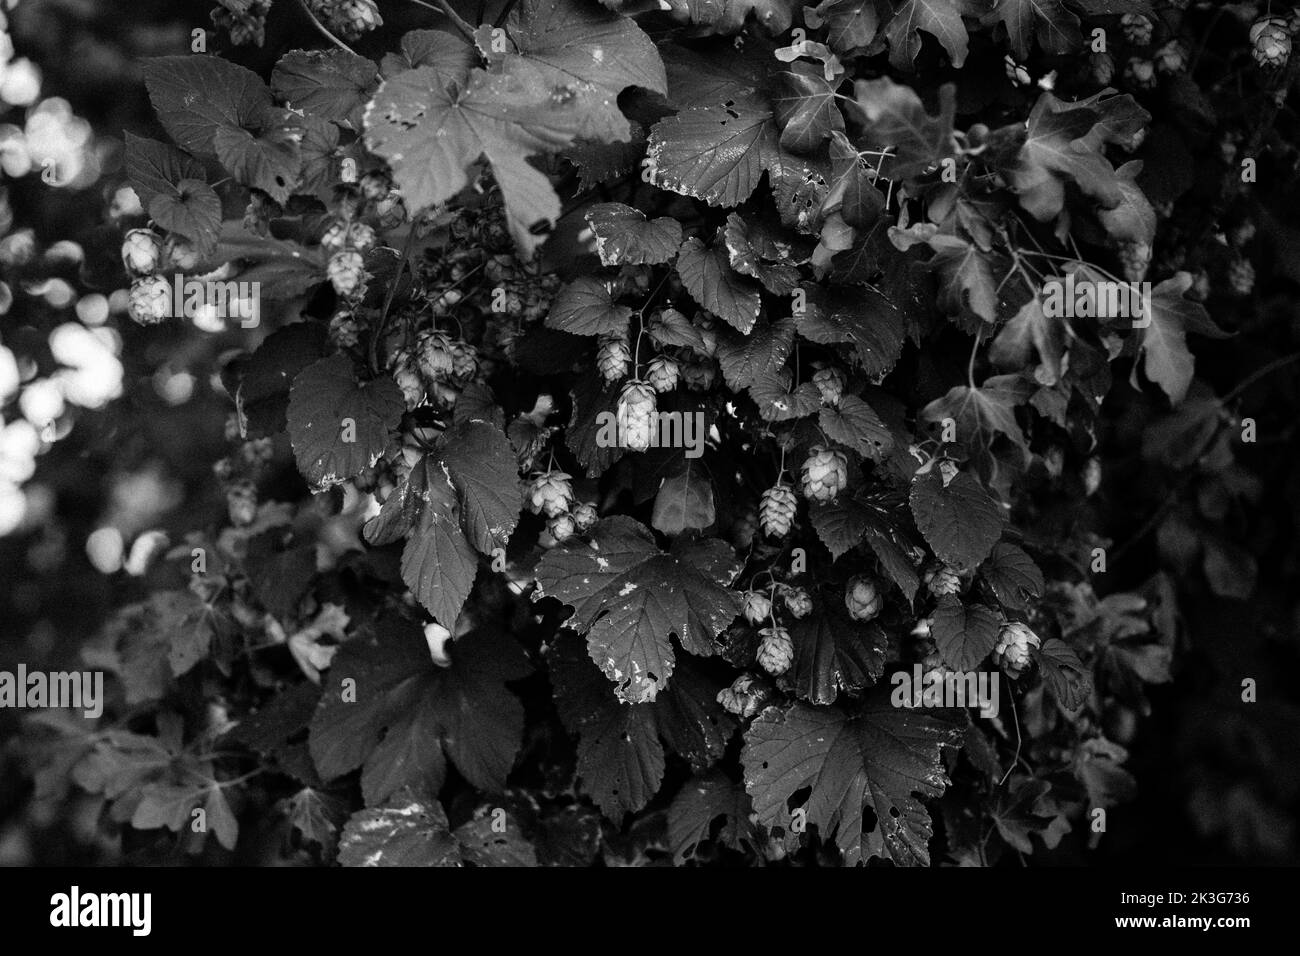 Hop vine / Hop Bine / Hop flowers growing wild amongst hedgerow plants and bushes in a hedge in the British countryside Stock Photo